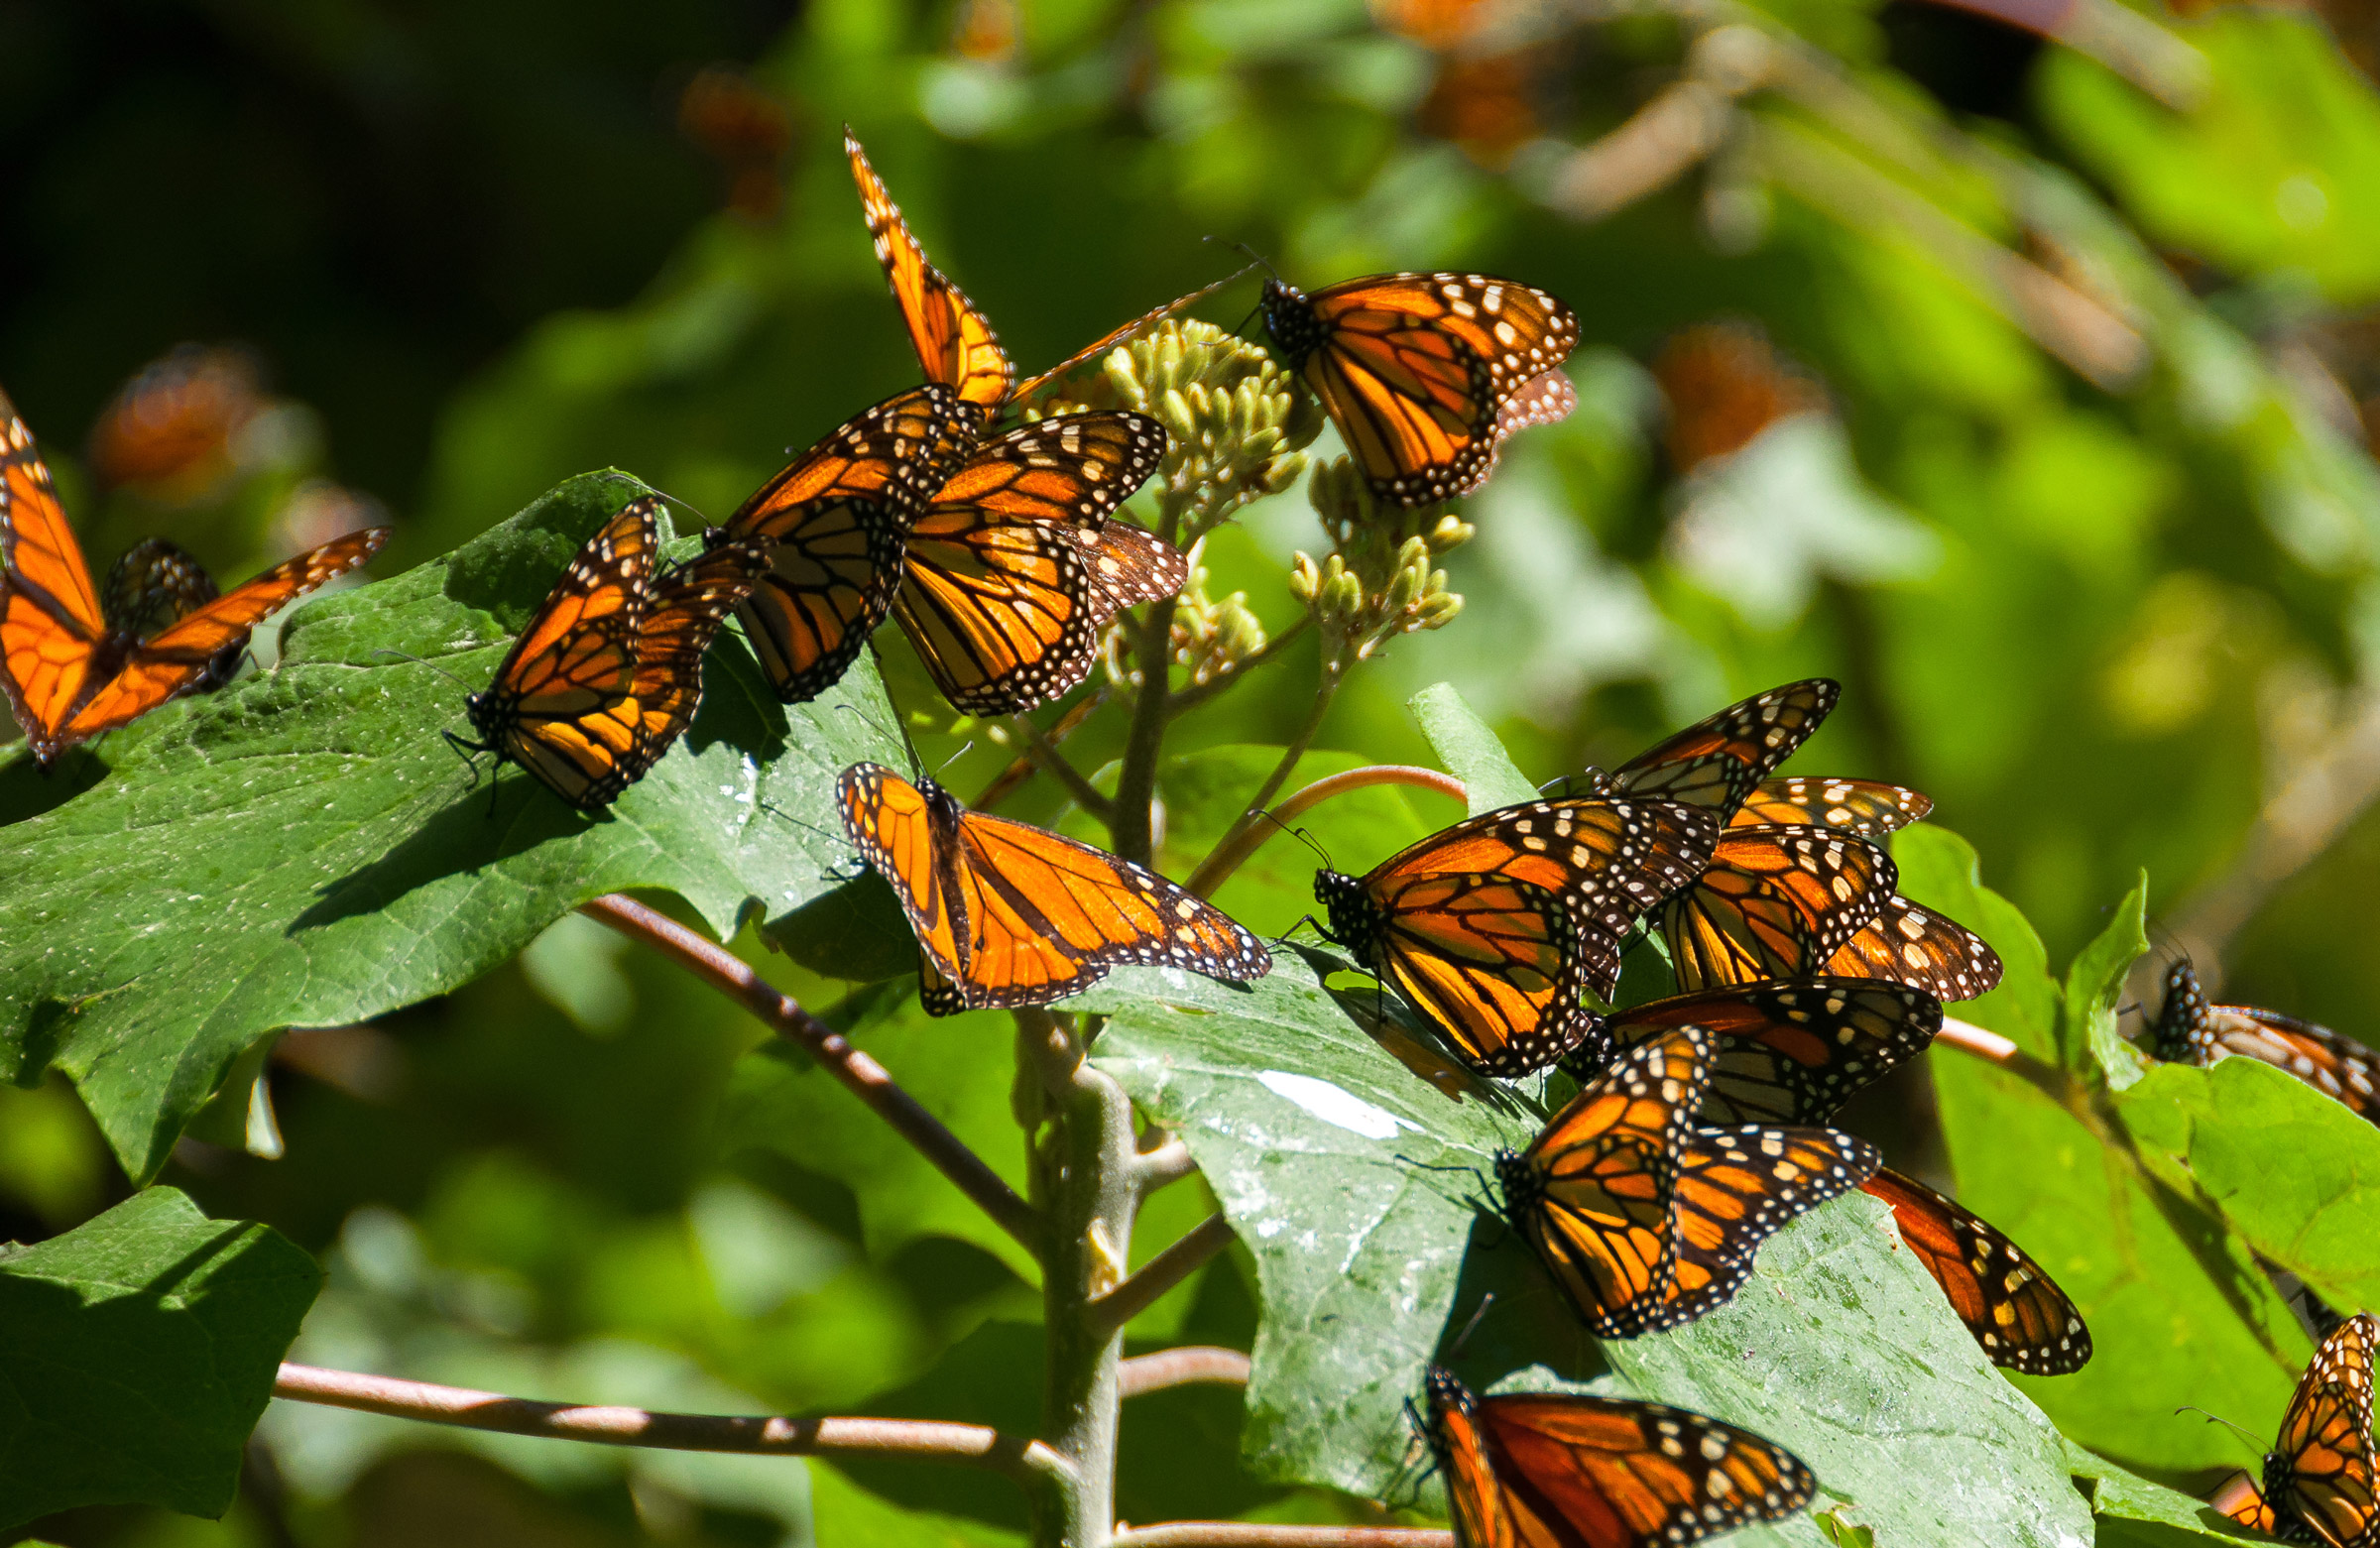 A Joint Effort To Save the Monarch Butterfly